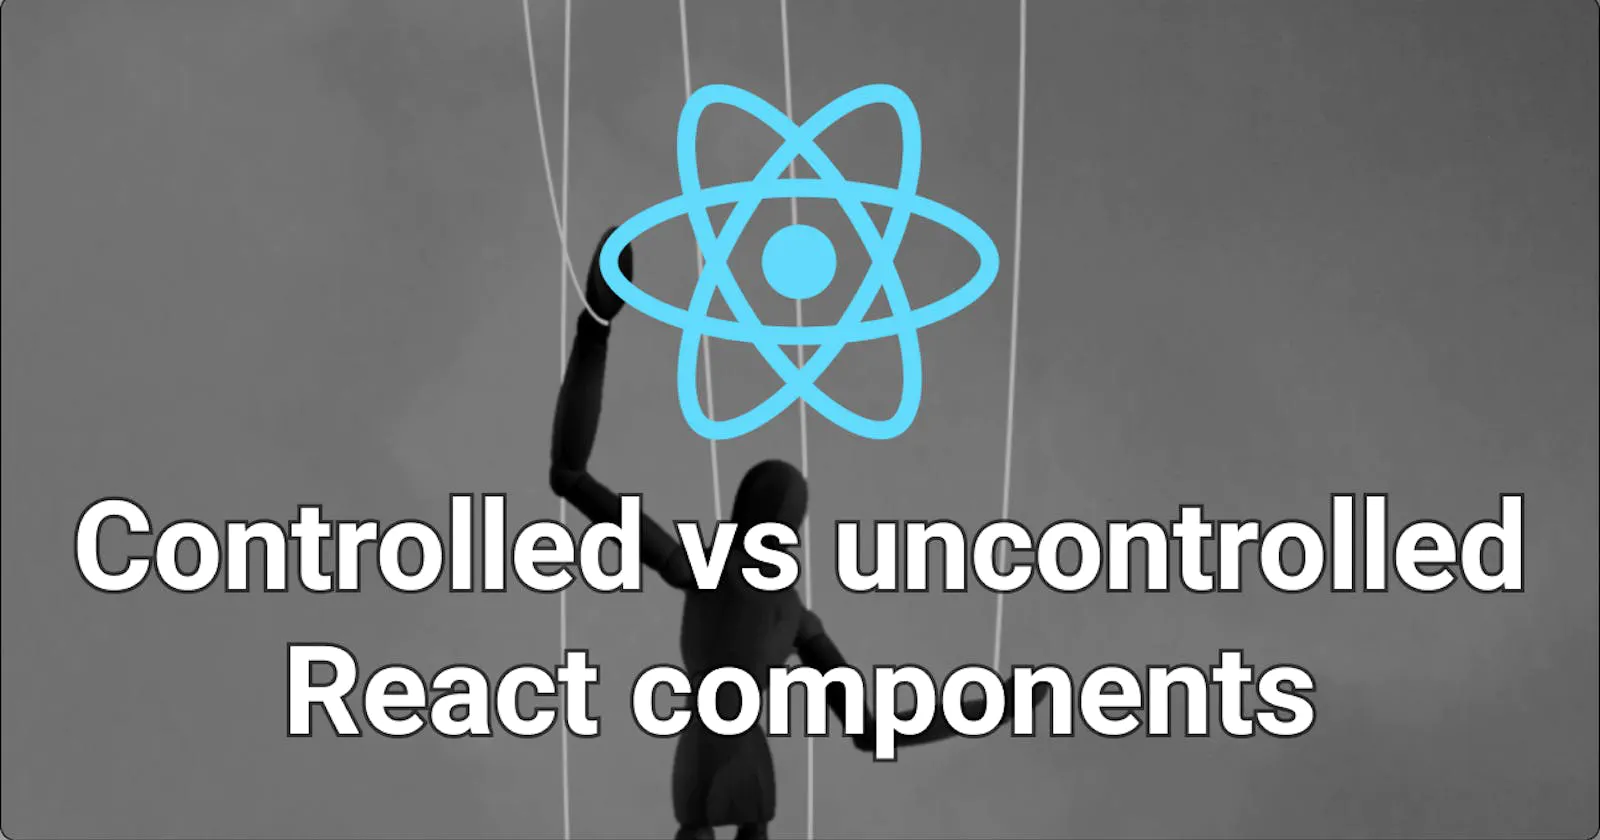 Can React components be both controlled and uncontrolled at the same time?